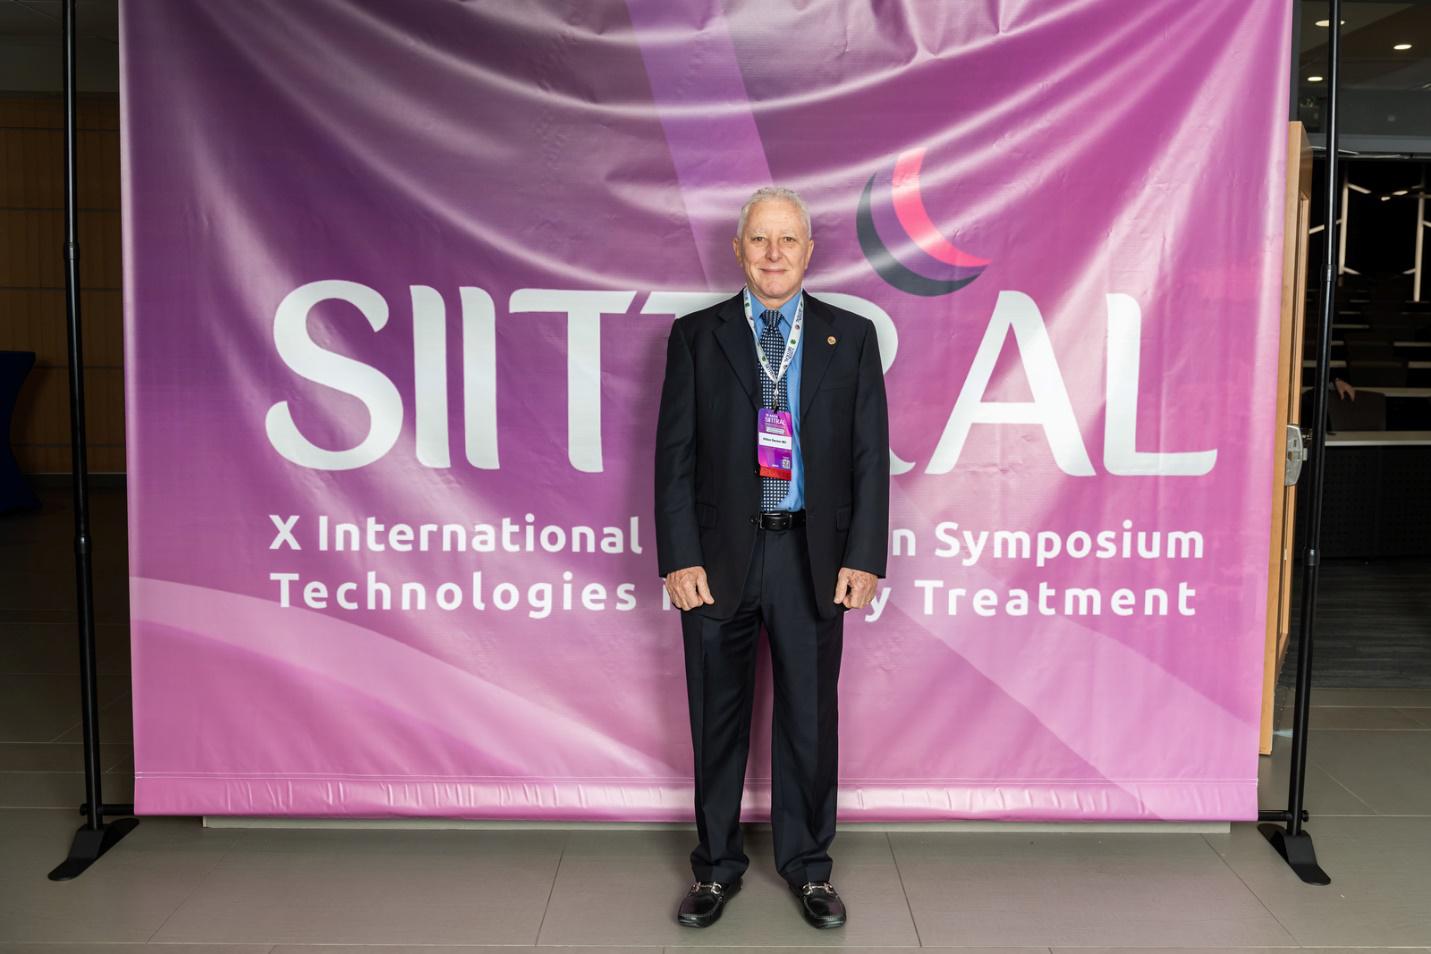 Dr. Becker at the Siittral plastic surgery meeting